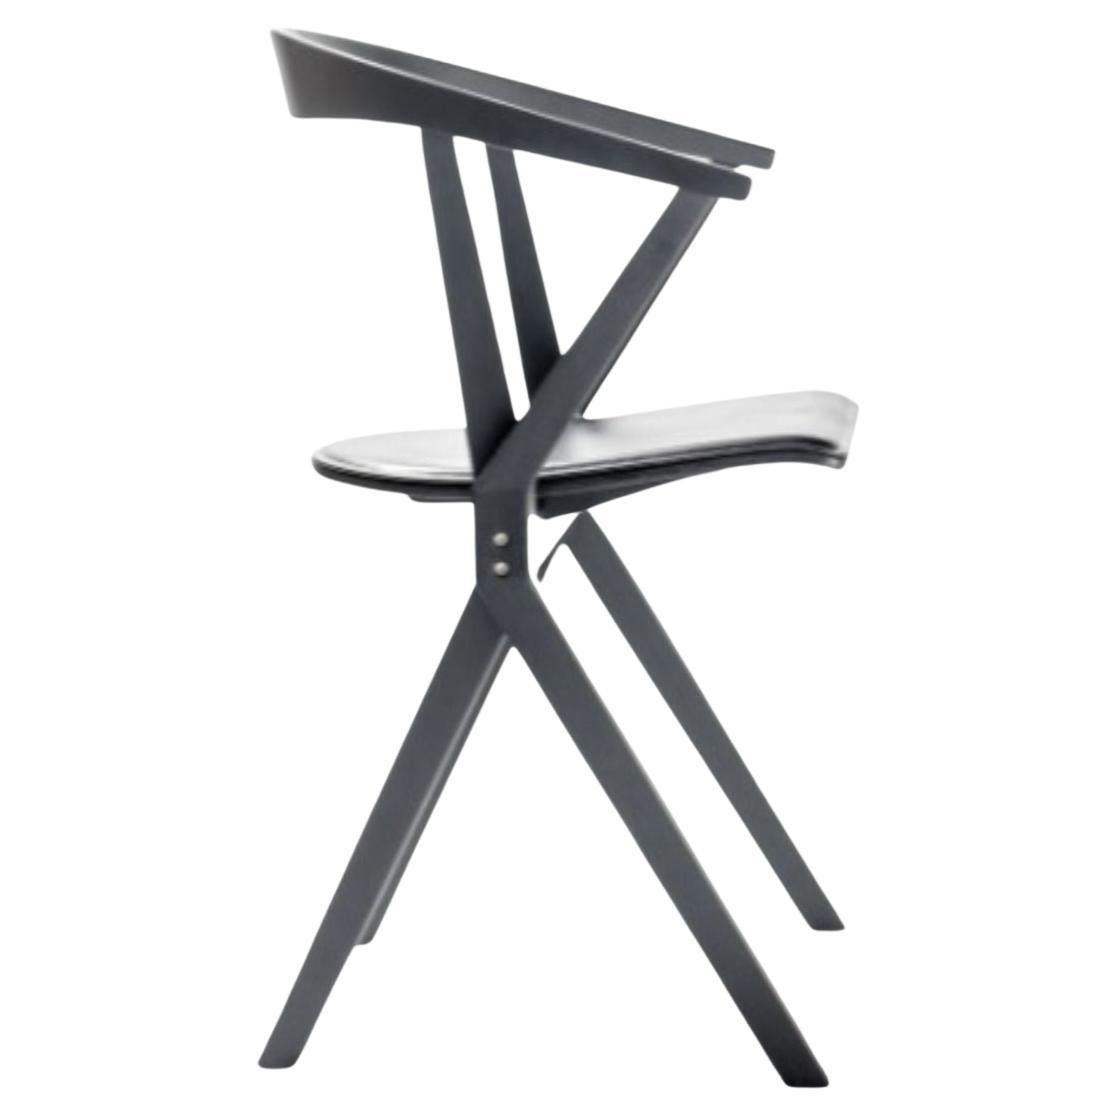 Chair B Black Lacquered Ash by Konstantin Grcic